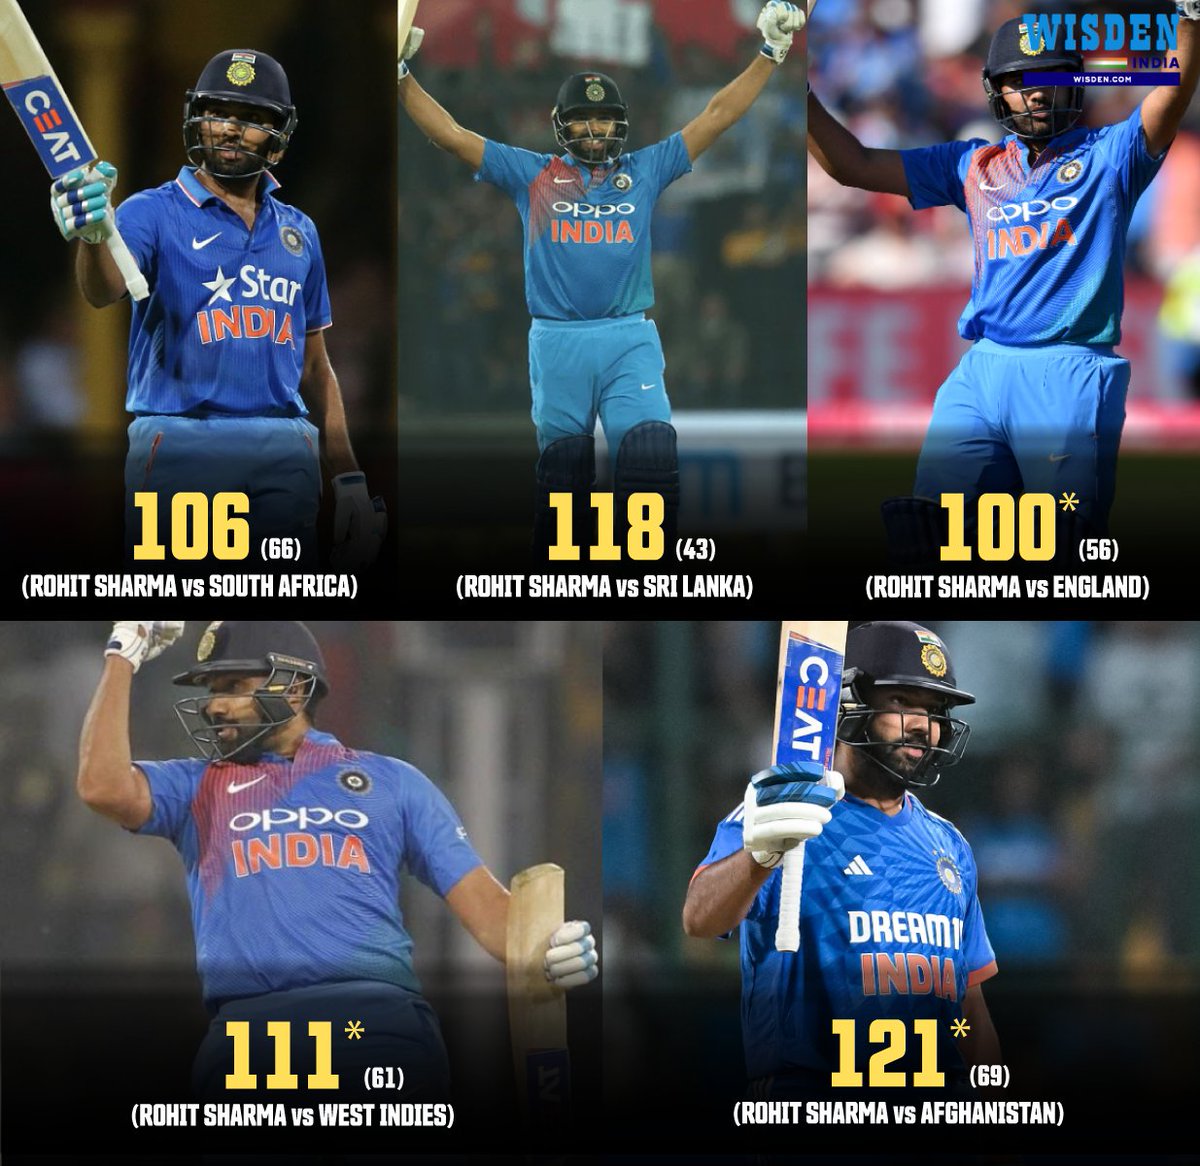 Rohit Sharma - Batter with the most centuries in men's T20Is 🔥 #RohitSharma #India #Cricket #WorldCup